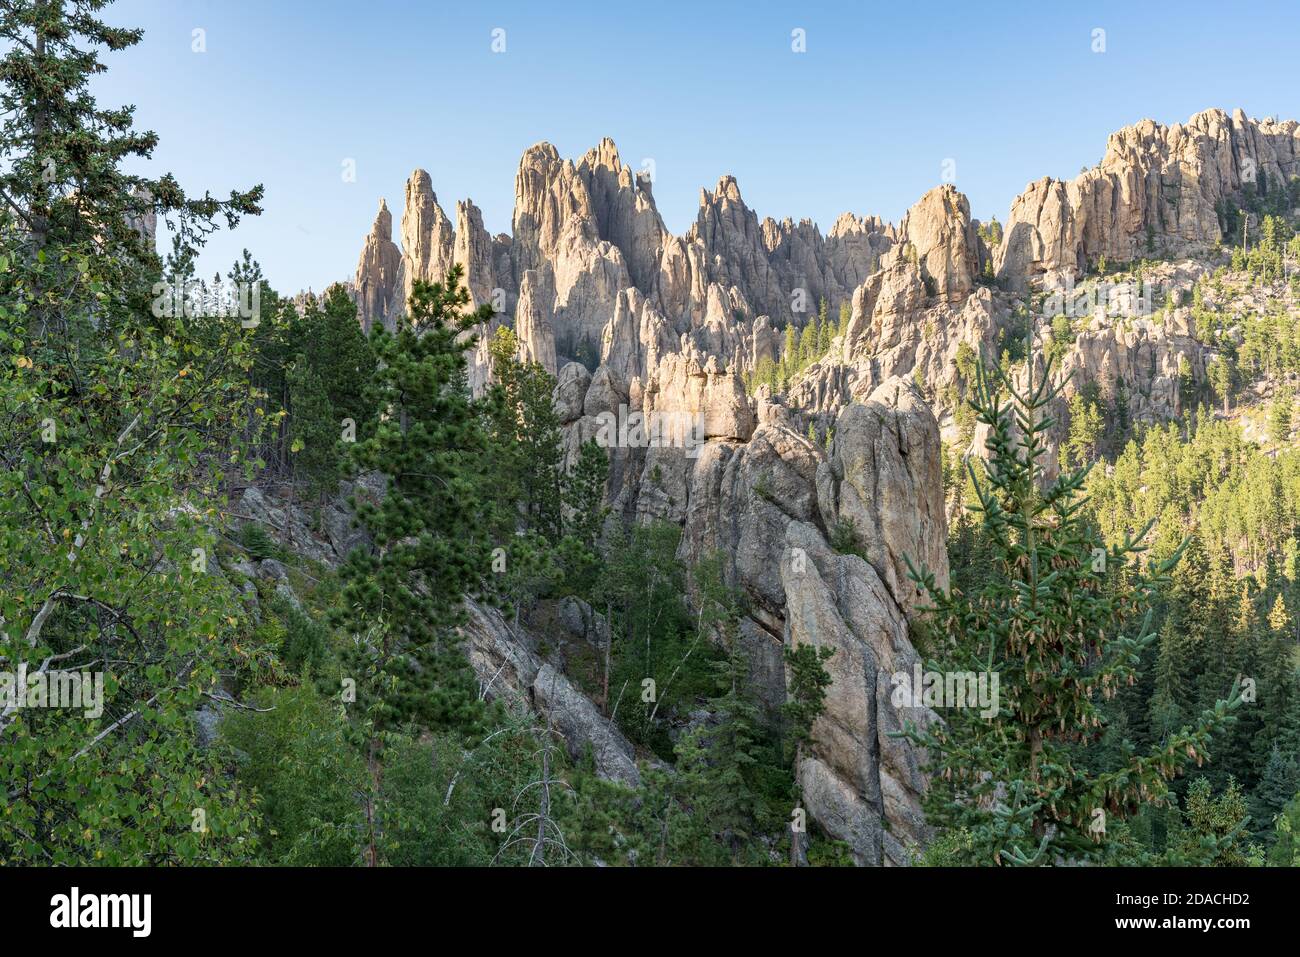 Needles stone formations in the Black Hills of South Dakota Stock Photo